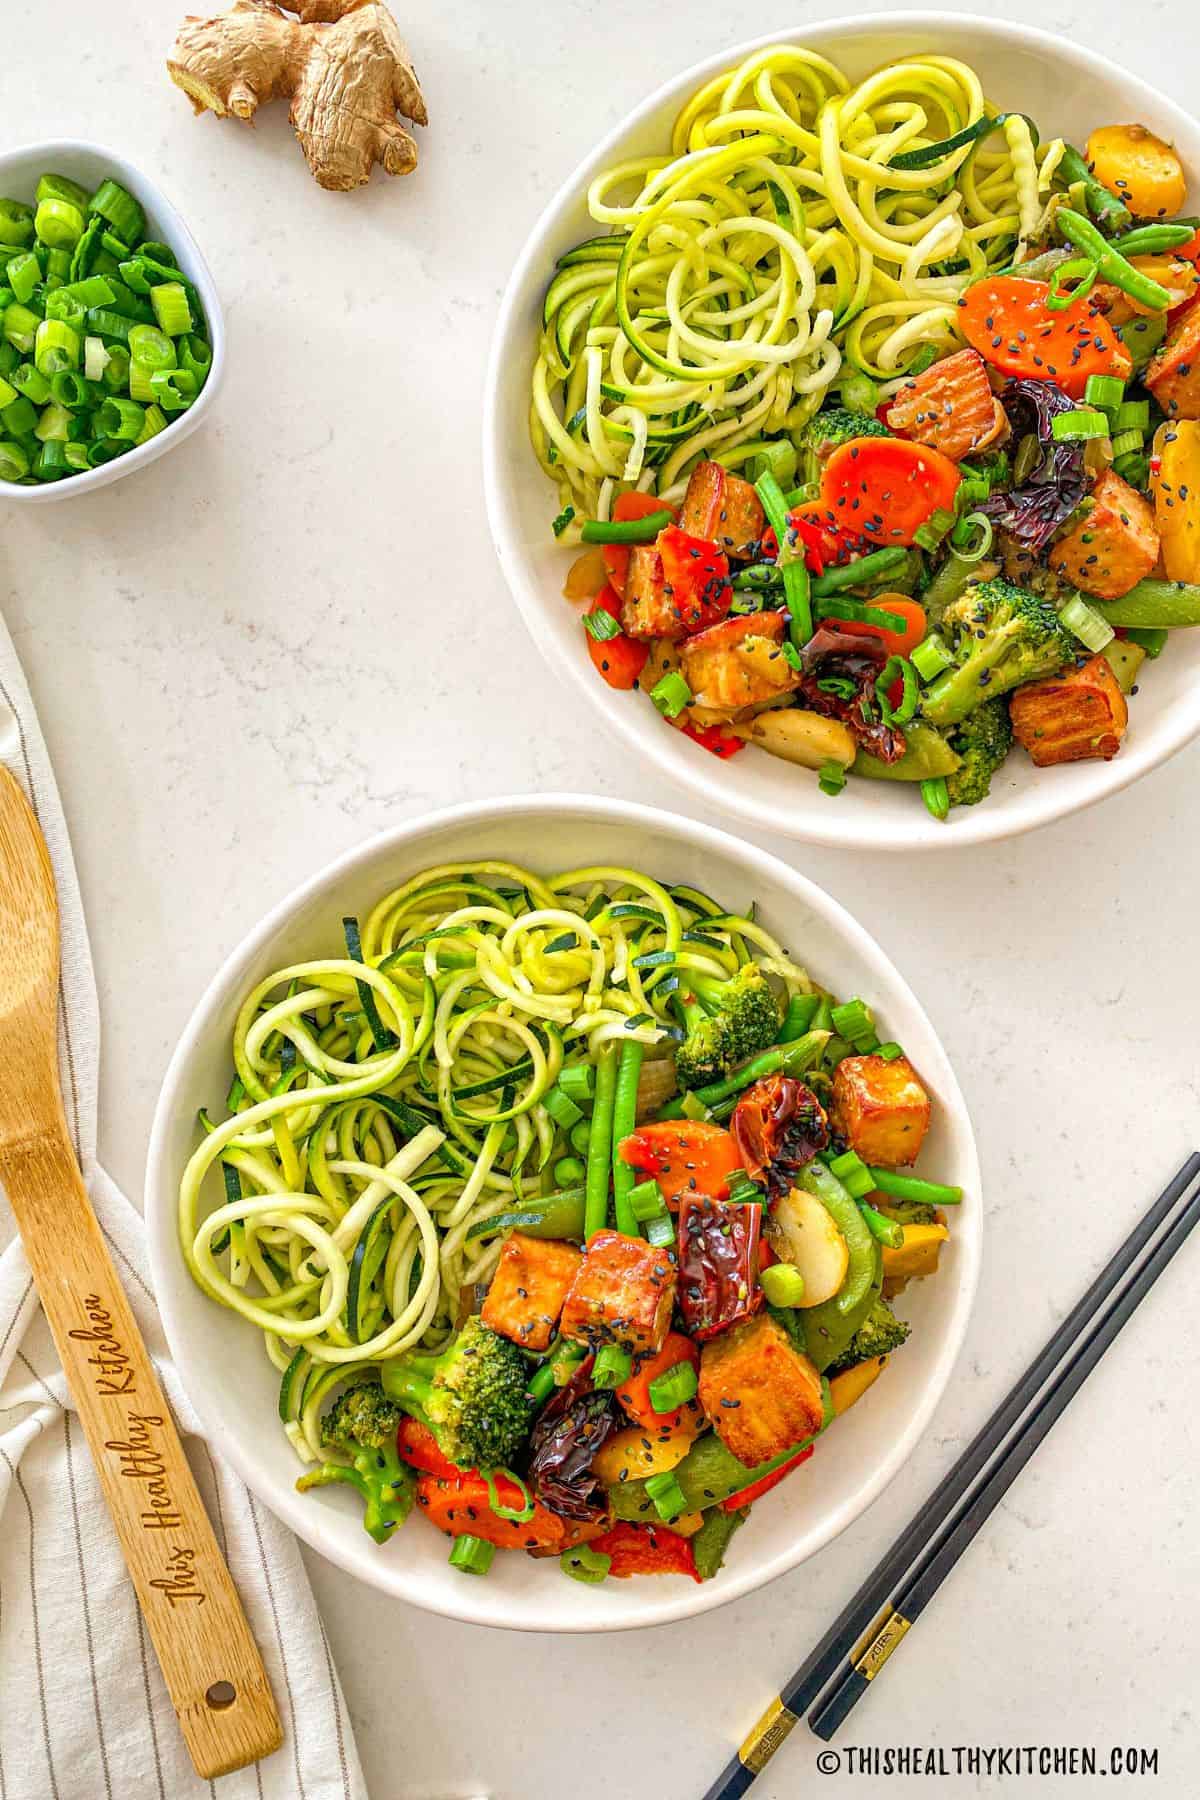 Two serving bowls filled with zucchini noodles, Szechuan tofu and veggies.